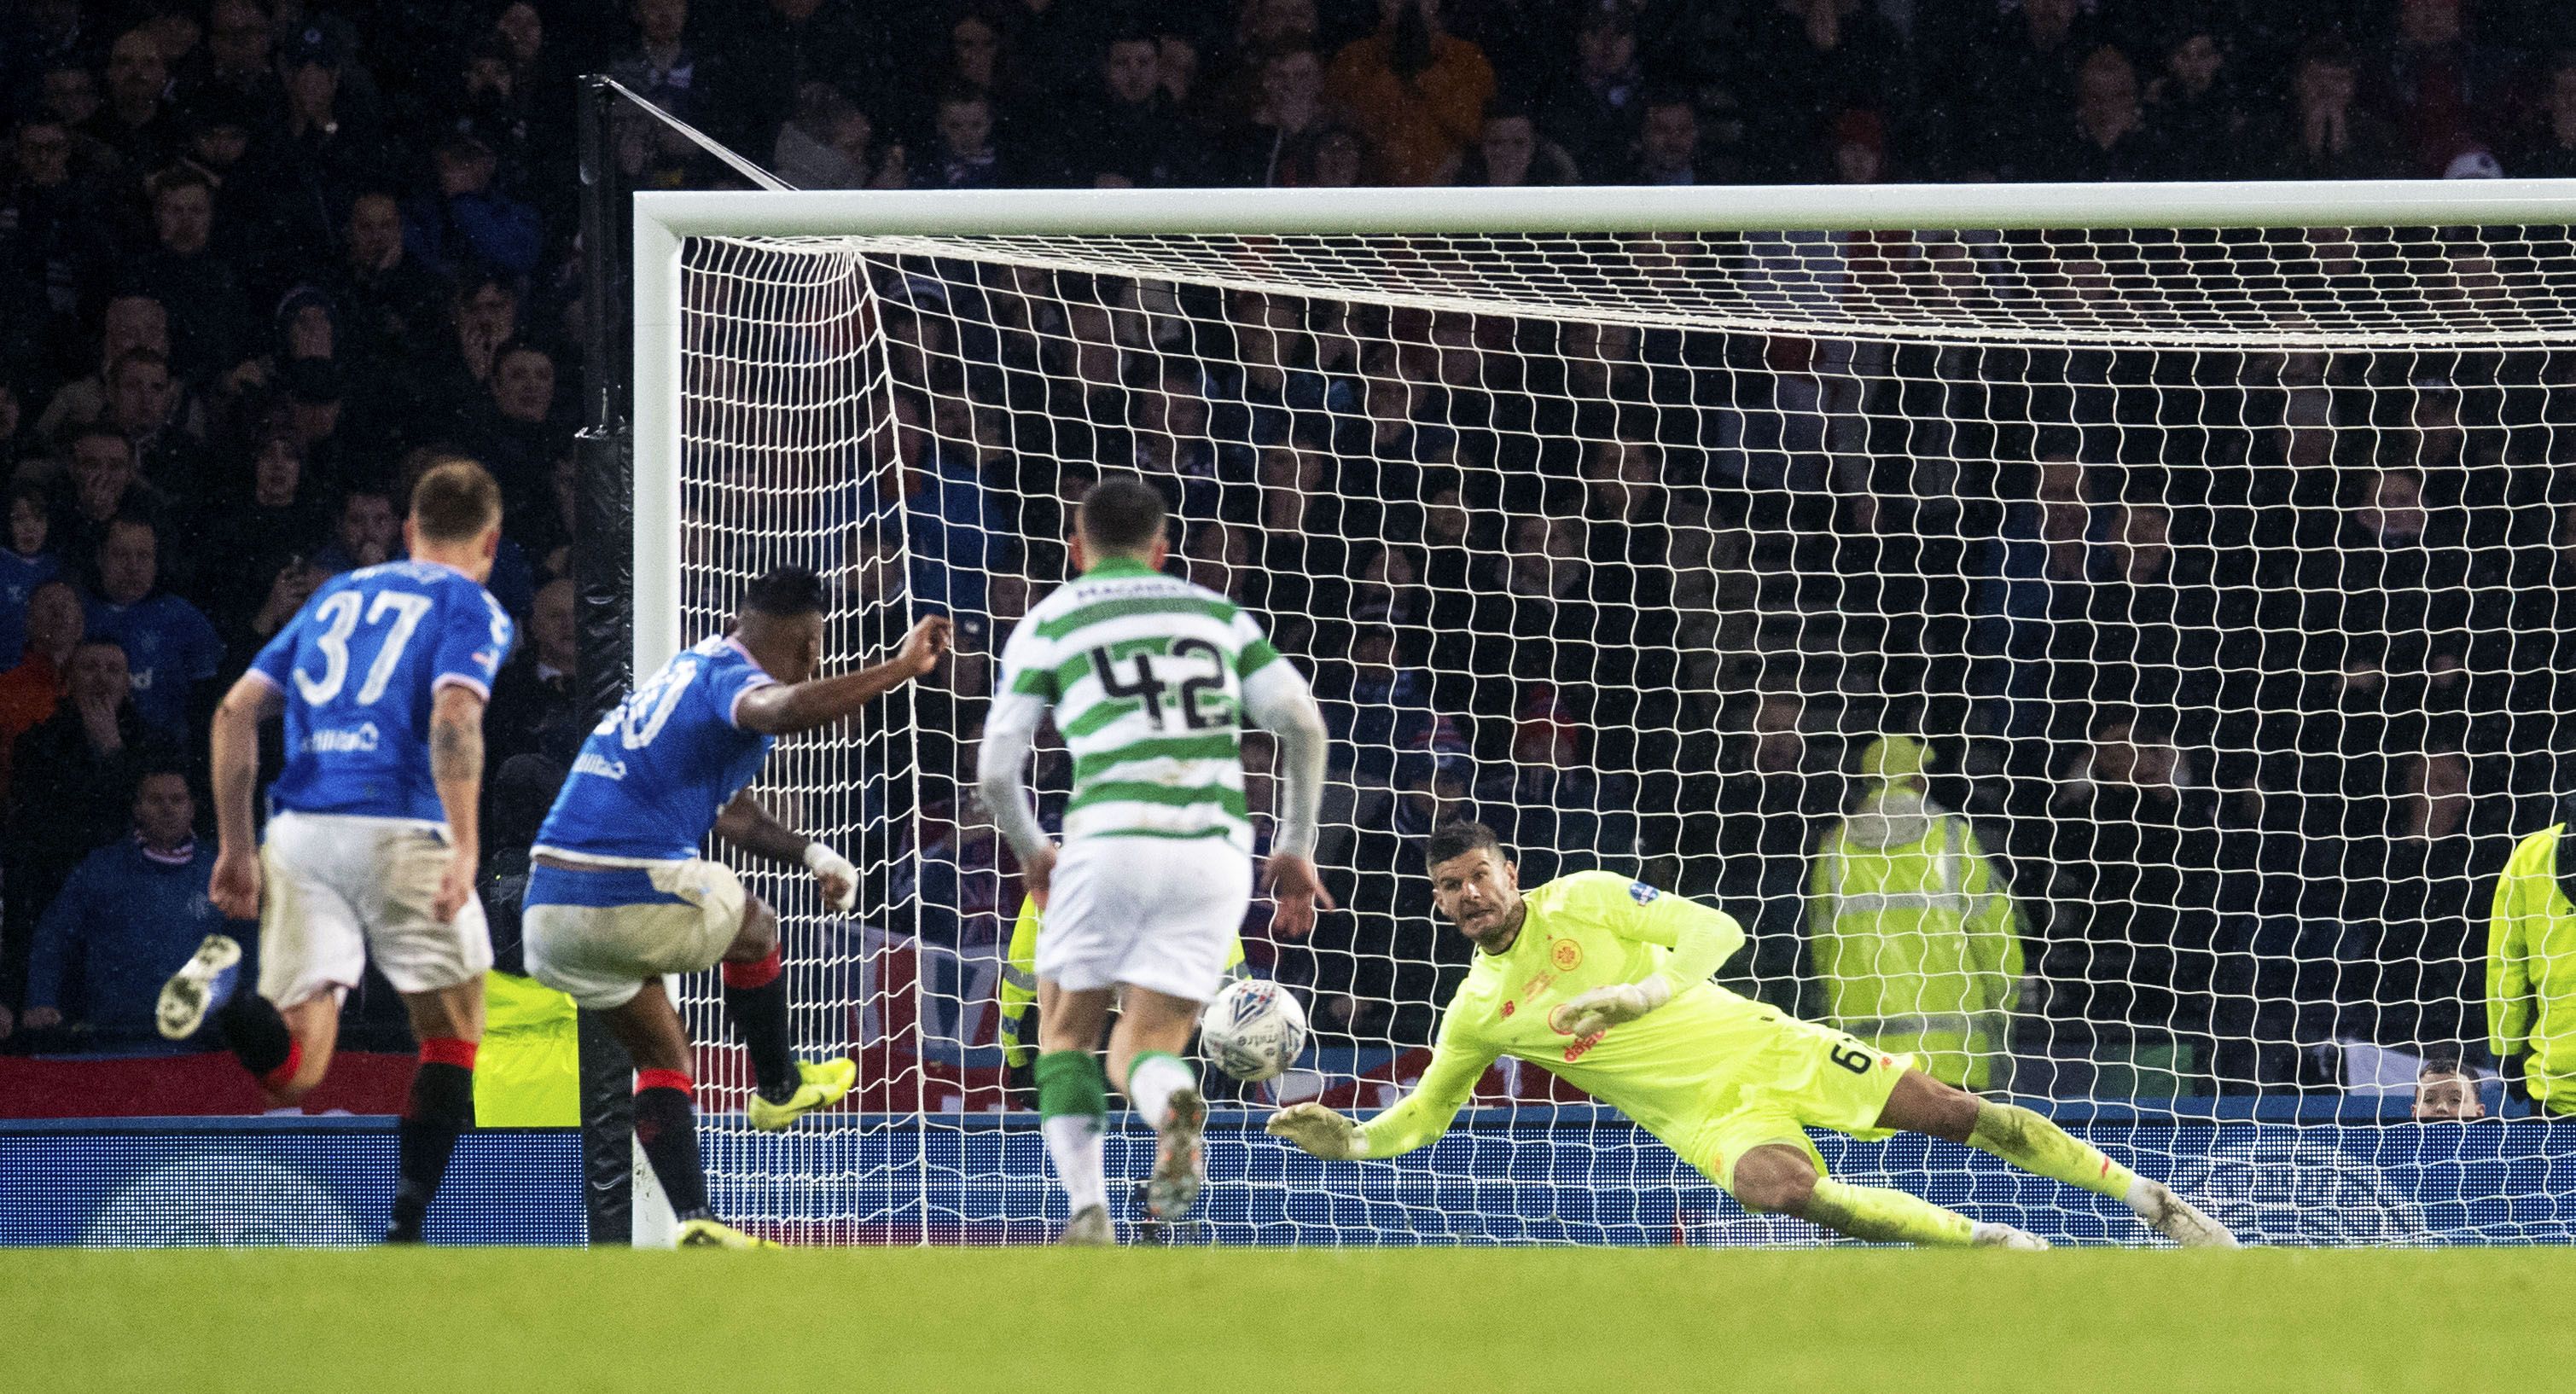 Fraser Forster frustrated Rangers throughout the Betfred Cup Final, including this penalty save from Alfredo Morelos